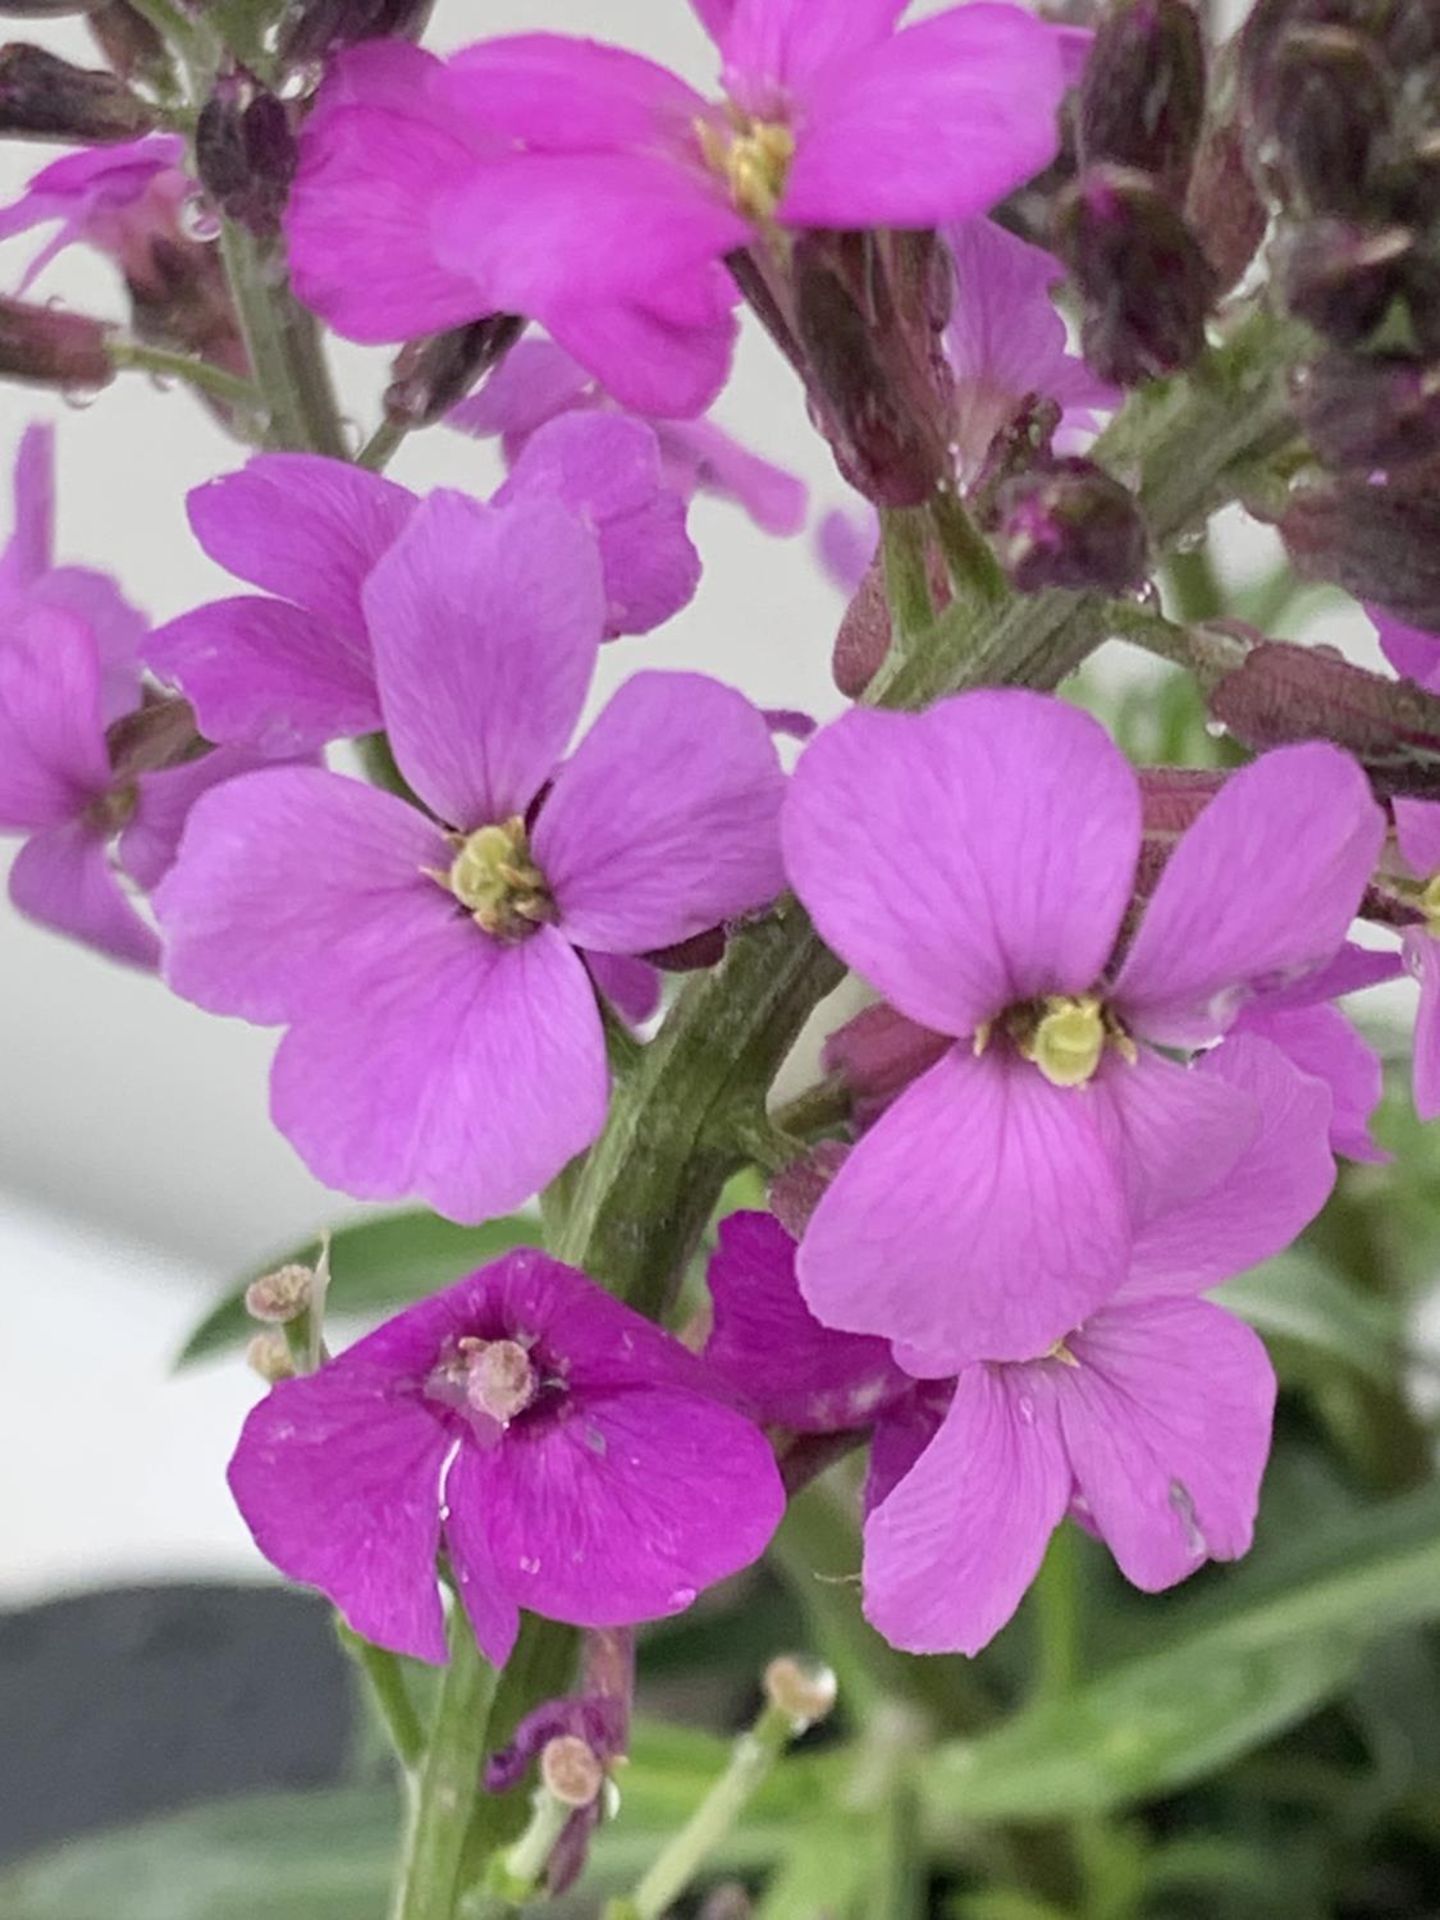 SIX ERYSIMUM BOWLES MAUVE IN 2 LTR POTS 40-50CM TALL TO BE SOLD FOR THE SIX PLUS VAT - Image 4 of 5